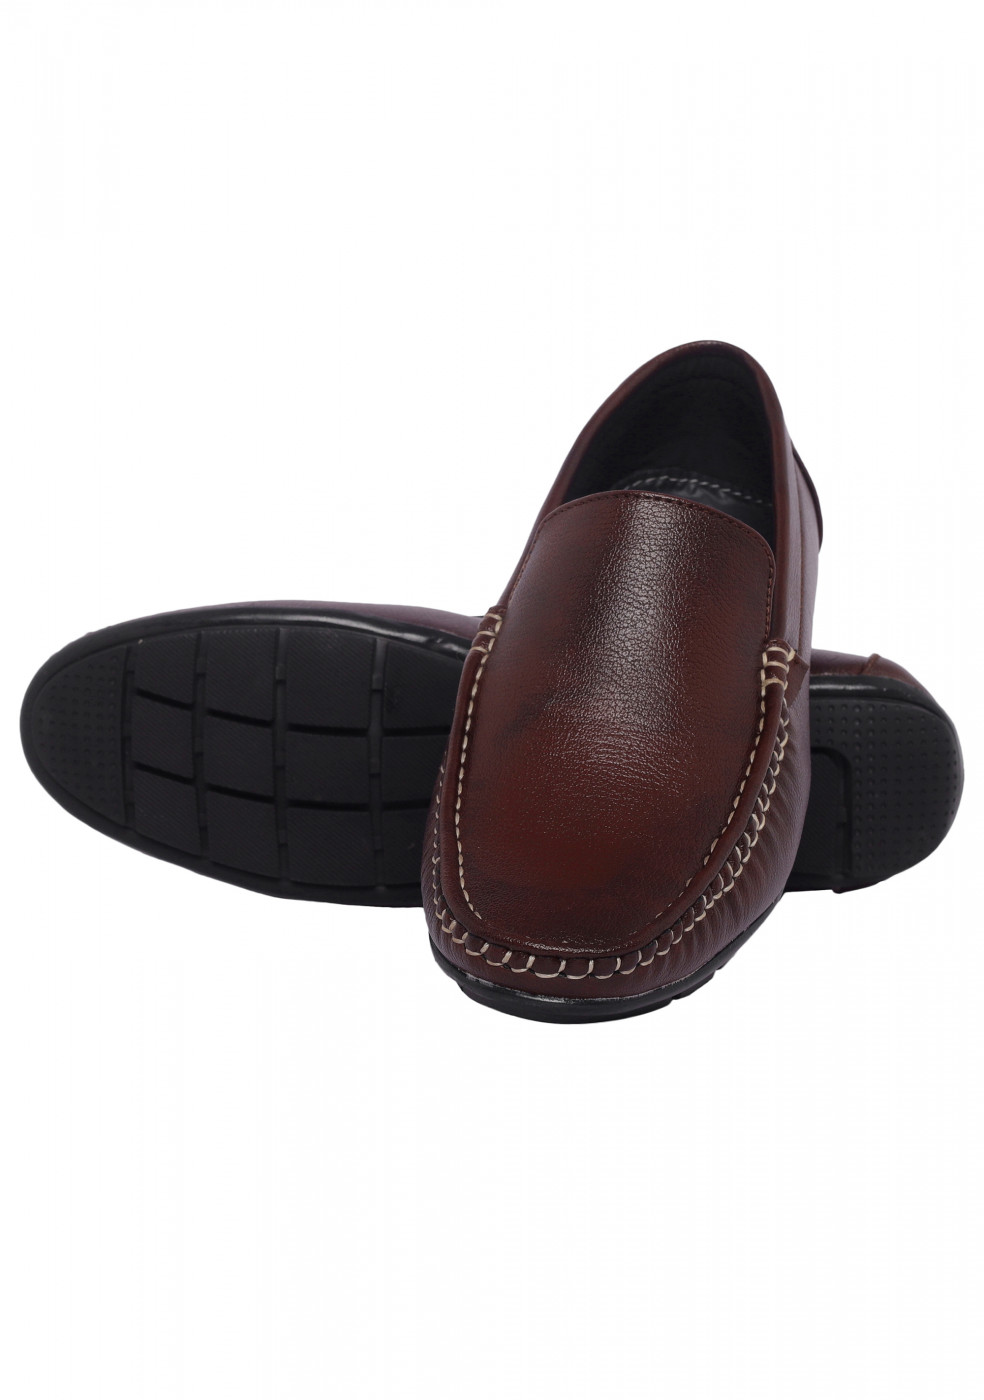 XSTOM Brown Loafers For Men